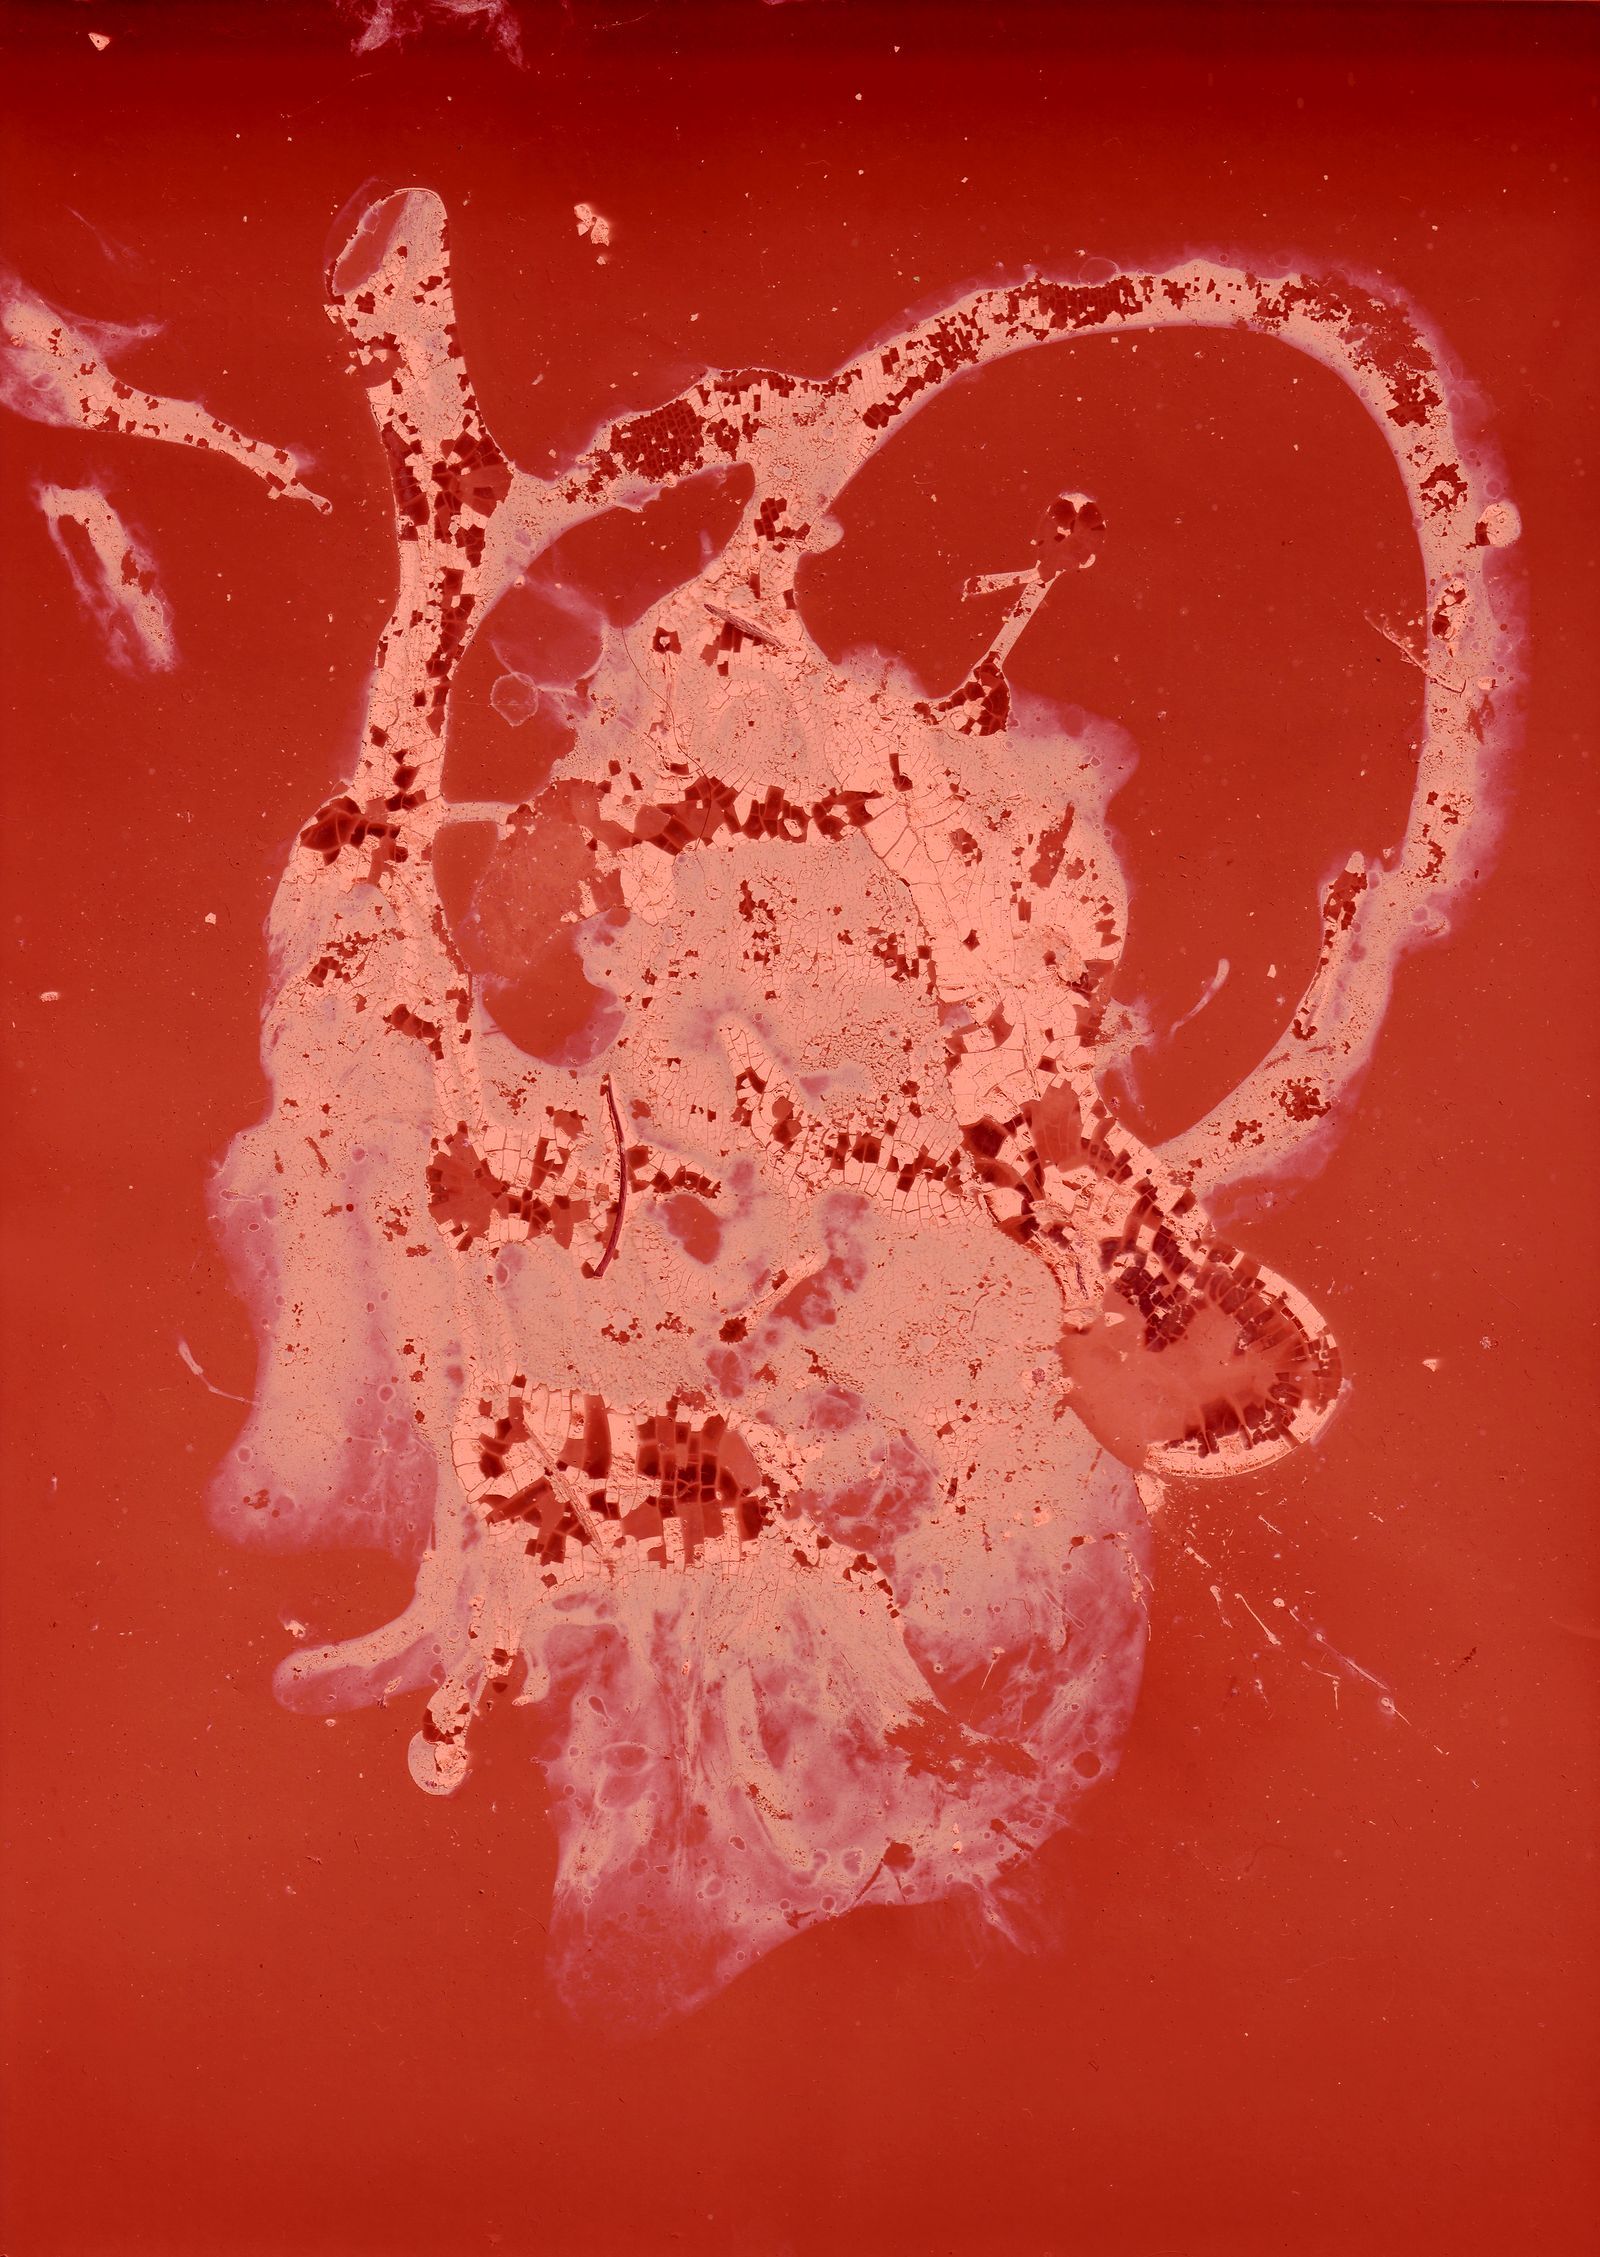 A red and white picture of an object - Blood